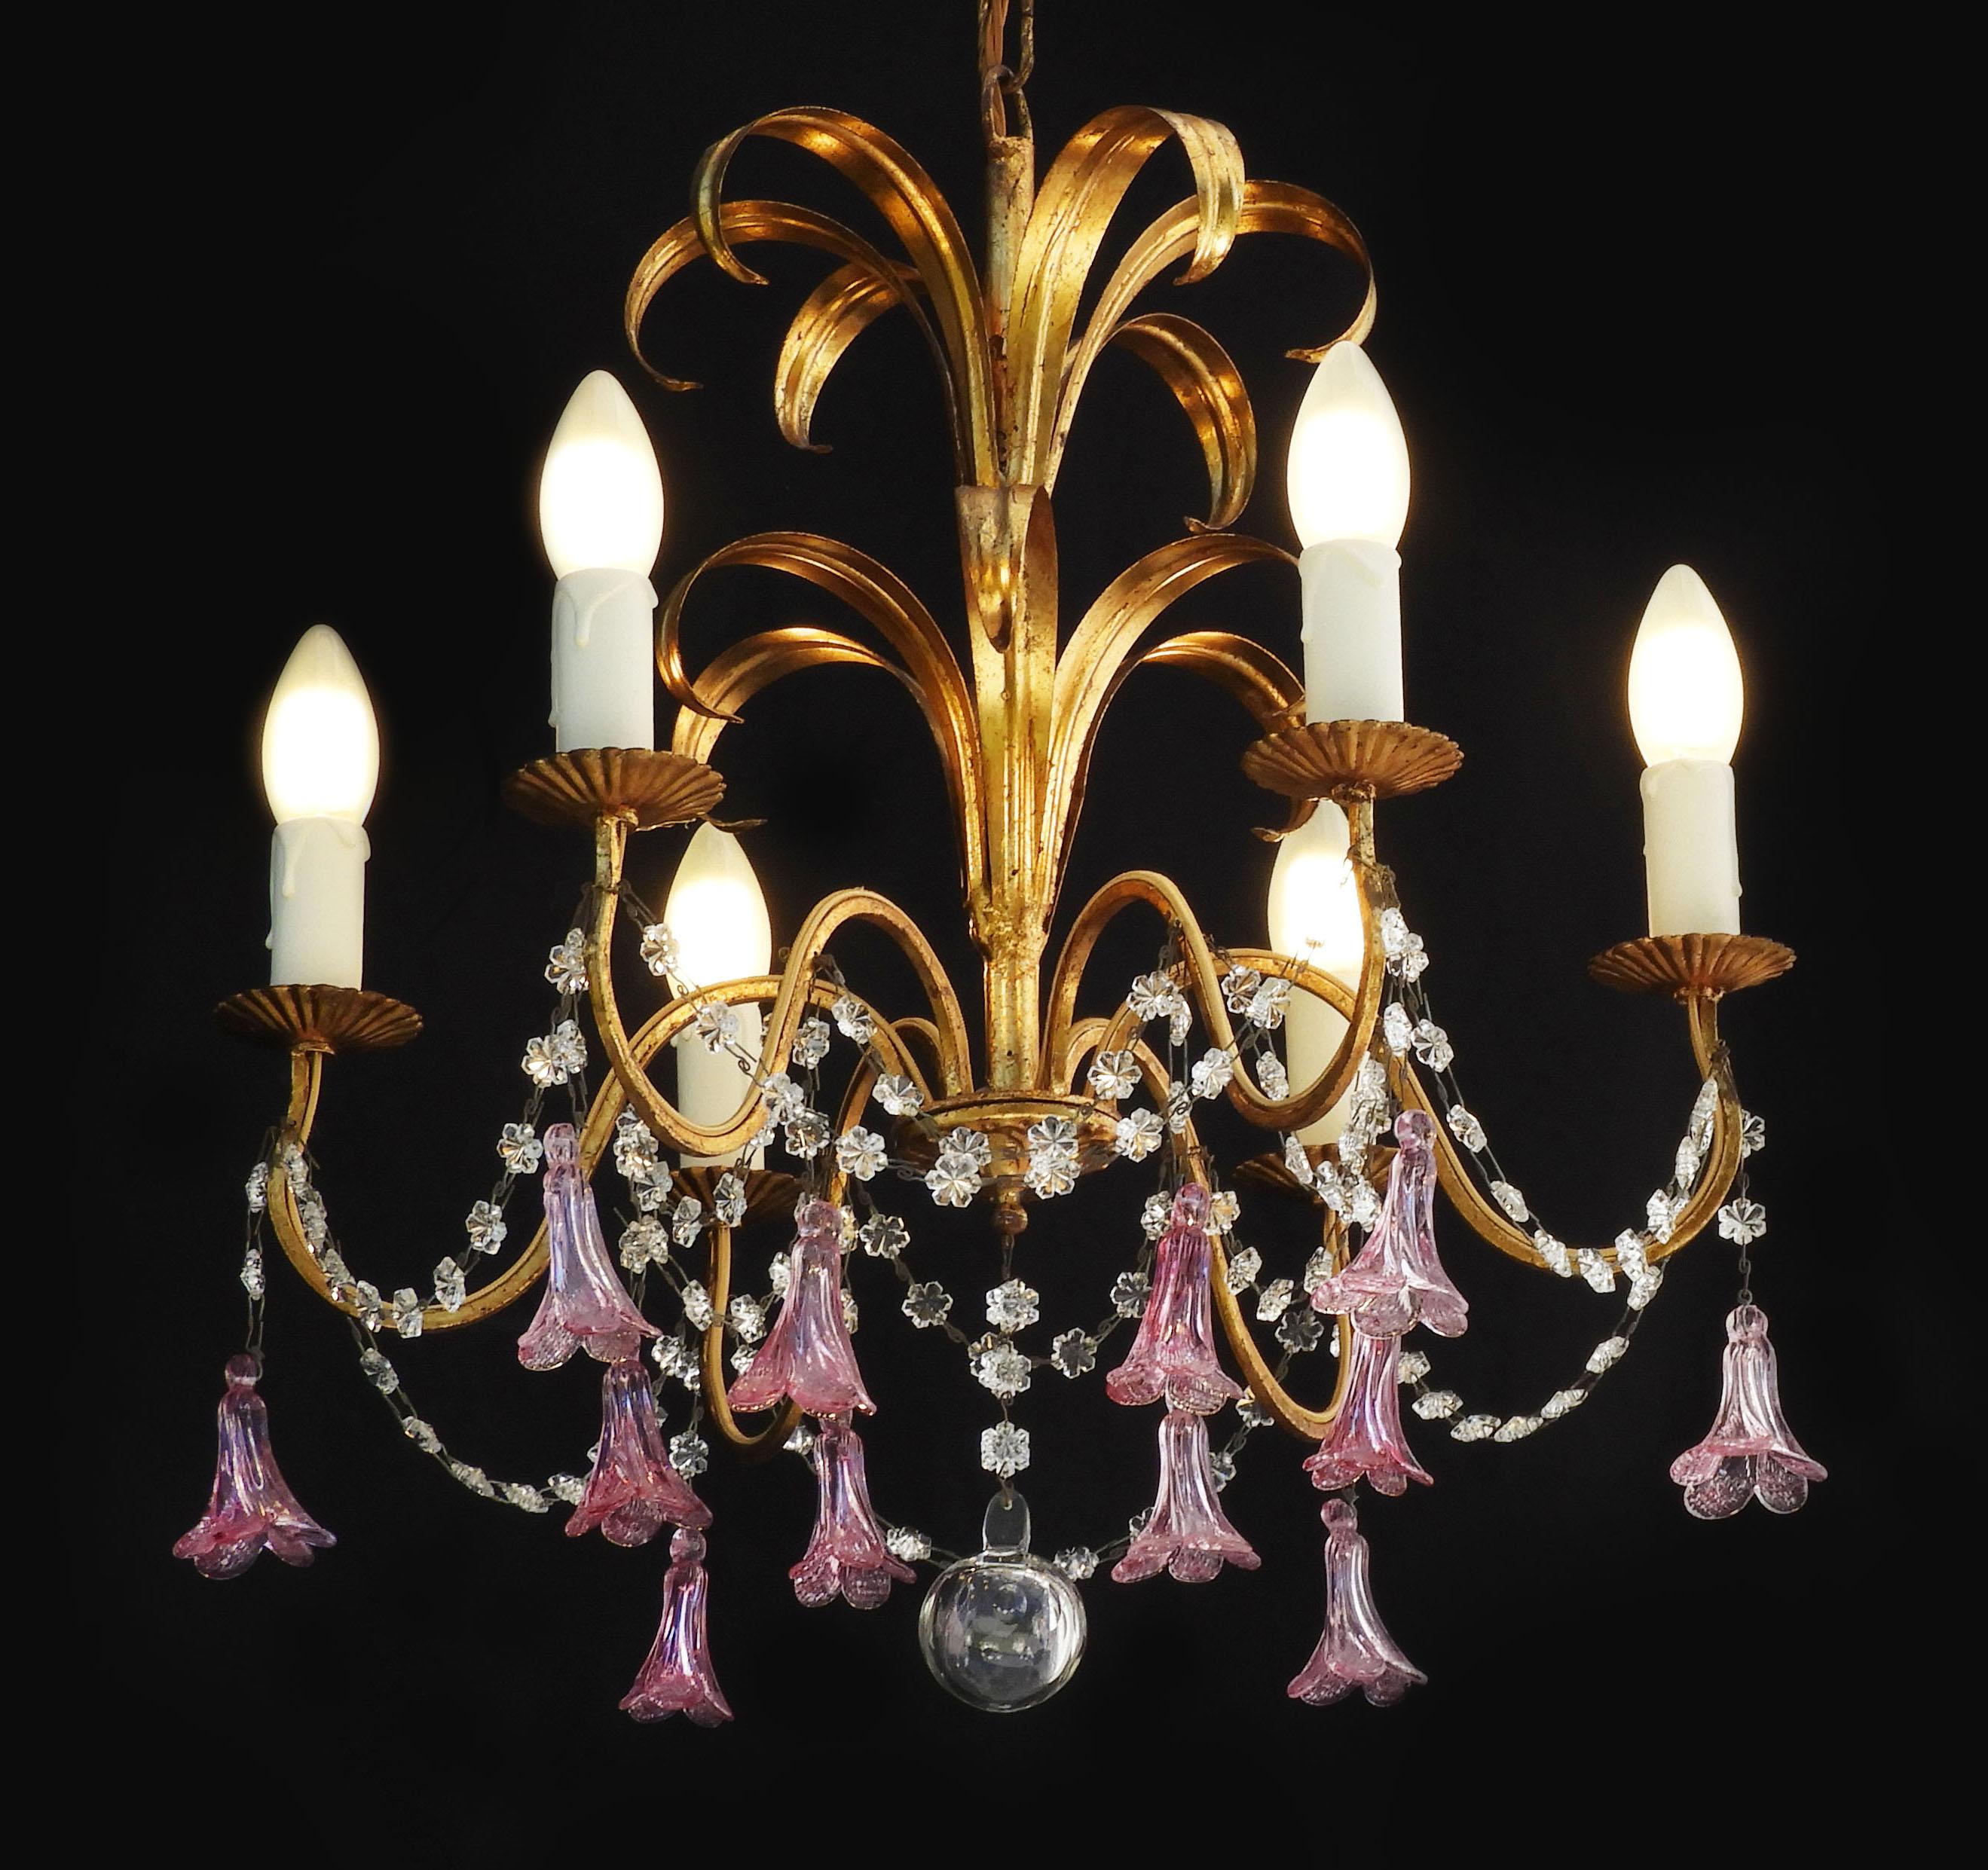 French 6 Light Chandelier C1950, Handmade Pink Flower Pendant Drops And Gilded Tôle
Charming gilded tôle chandelier, with pink Foxglove style ‘pampilles’ from mid-century France circa 1950
An unusual six-light chandelier, with 12 hand made,